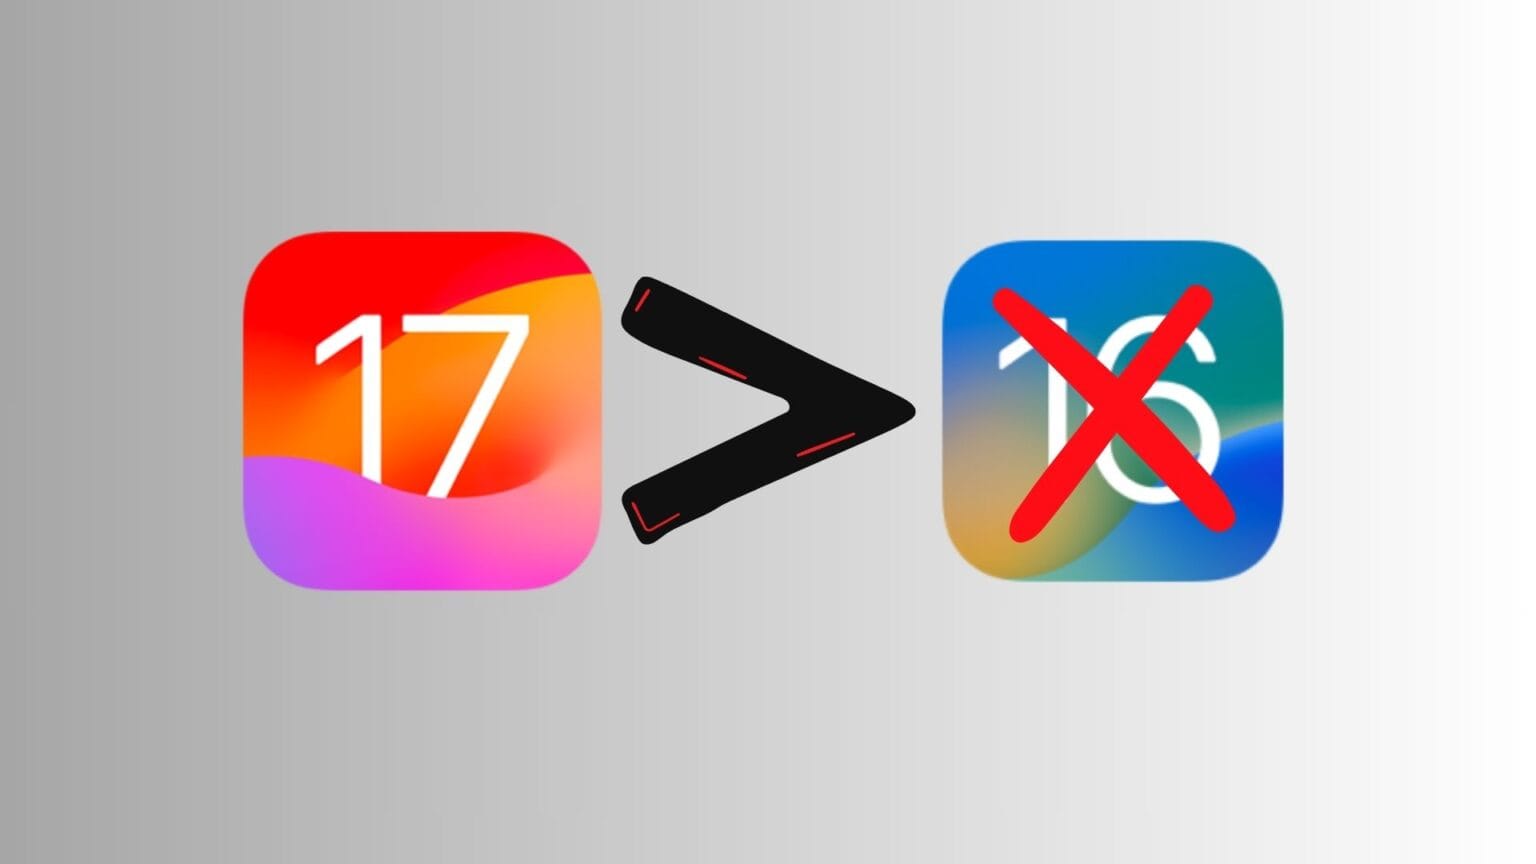 Downgrading from iOS 17 to iOS 16 is no longer possible.